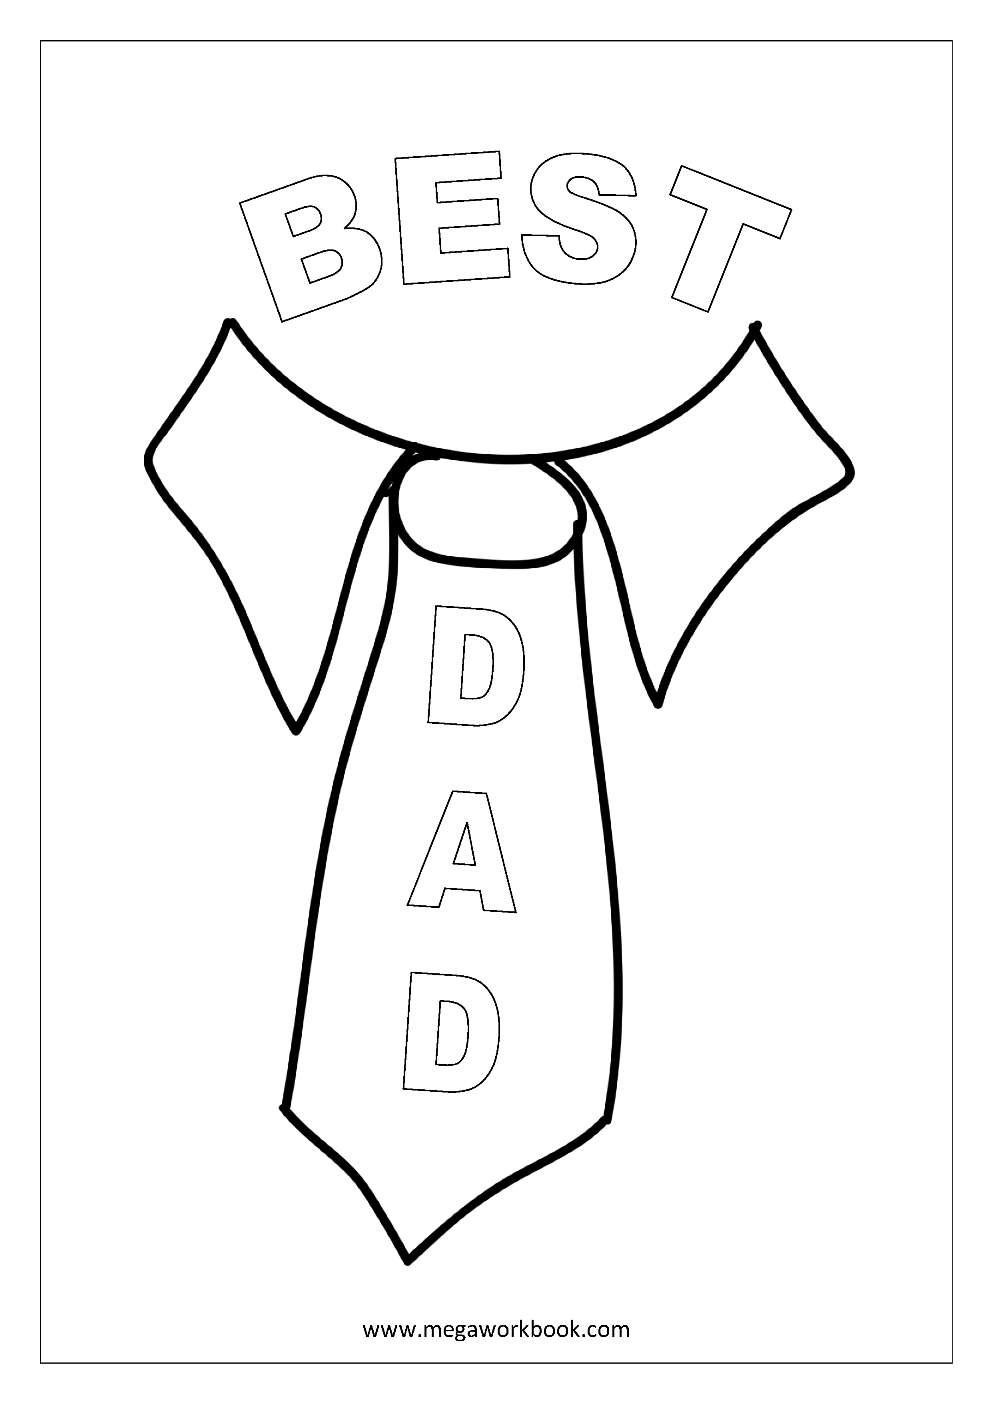 Free Printable Father's Day (Fathers Day) Coloring Pages for Kids